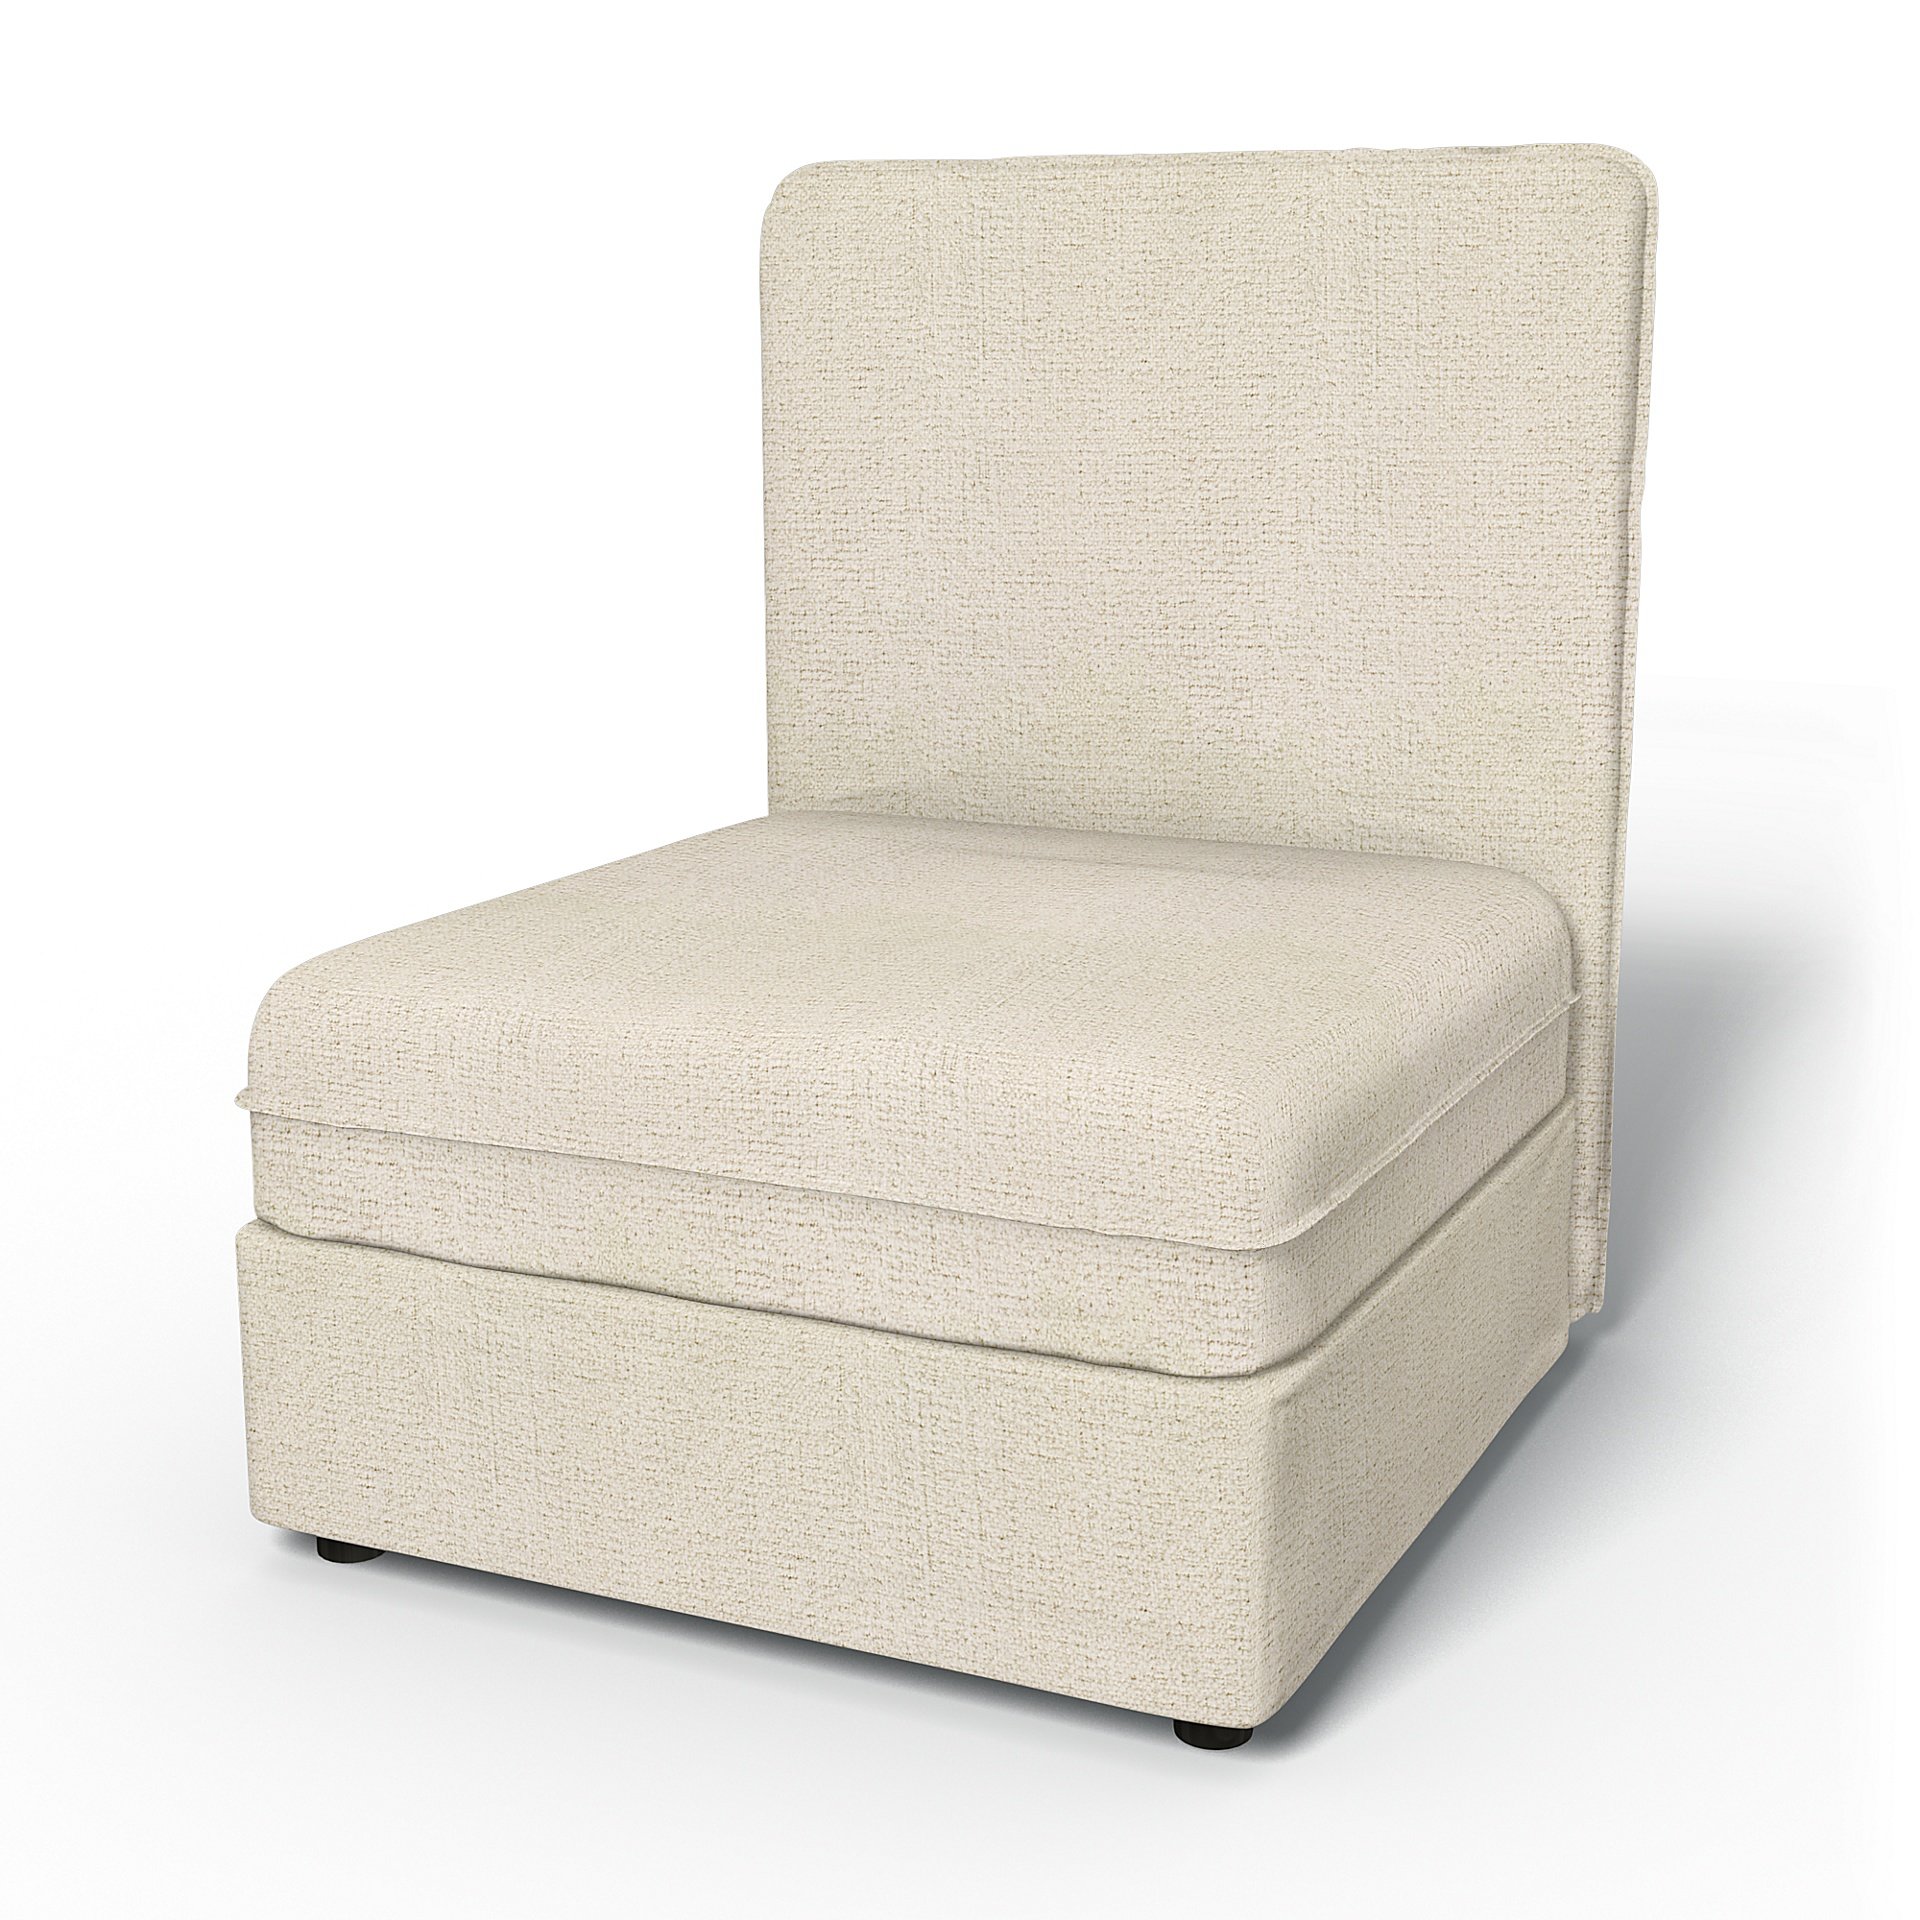 IKEA - Vallentuna Seat Module with High Back and Storage Cover 80x100cm 32x39in, Ecru, Boucle & Text